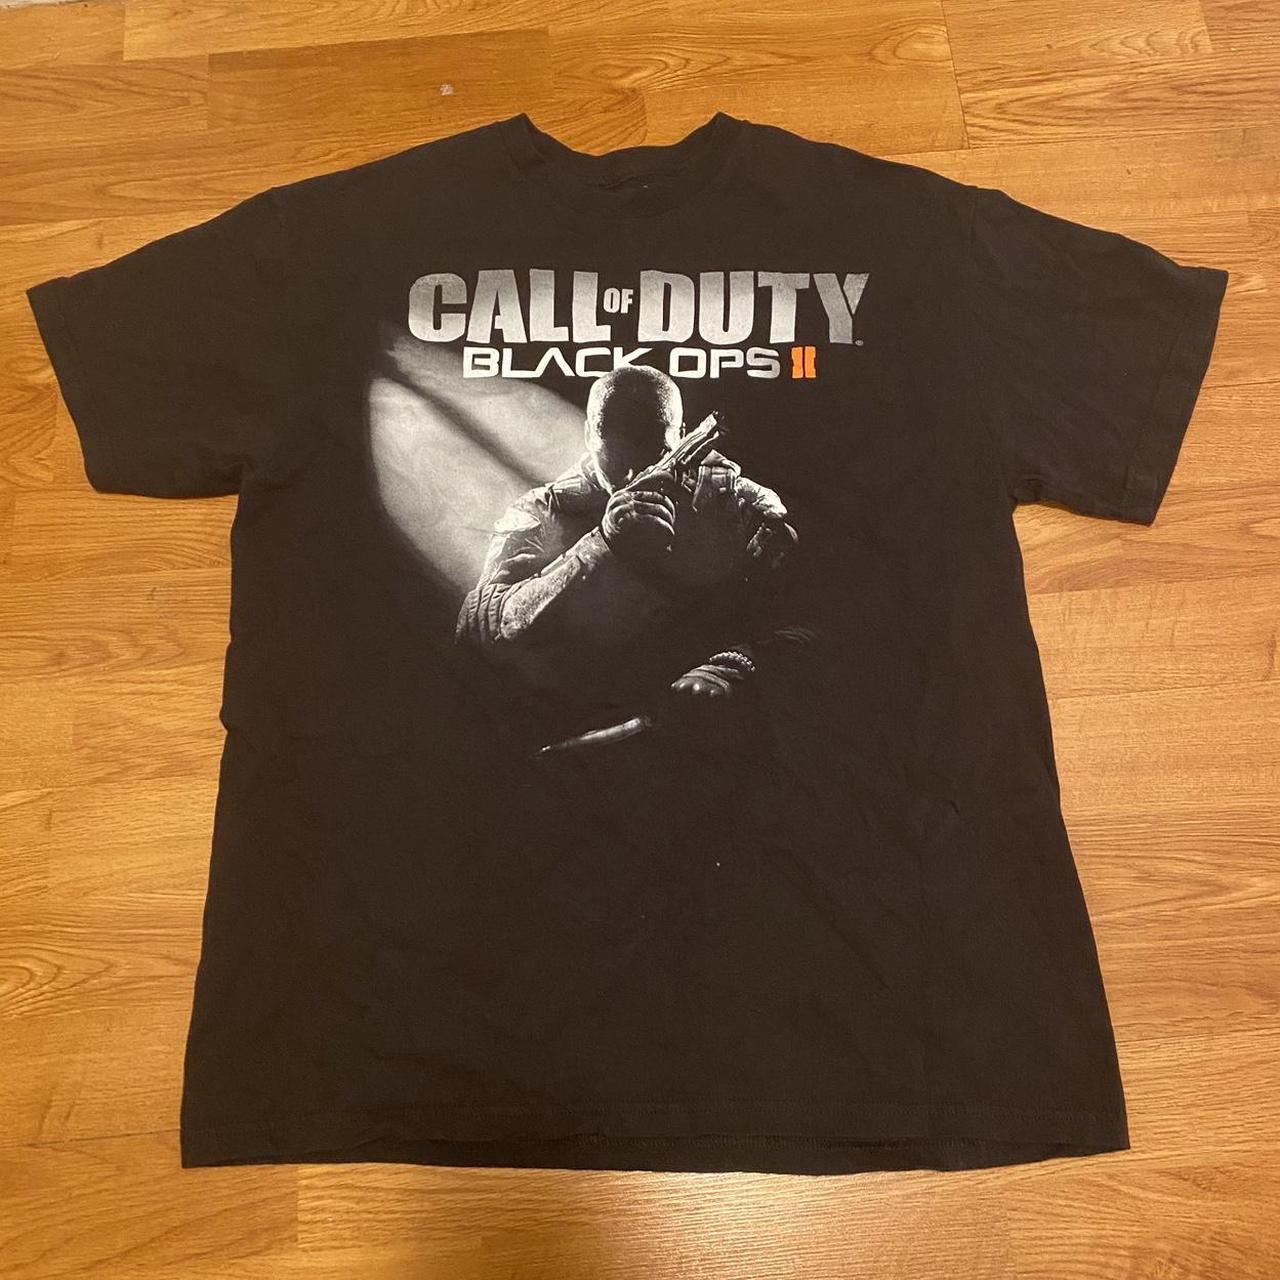 Large PERFECT CONDITION call of duty black ops 2... - Depop